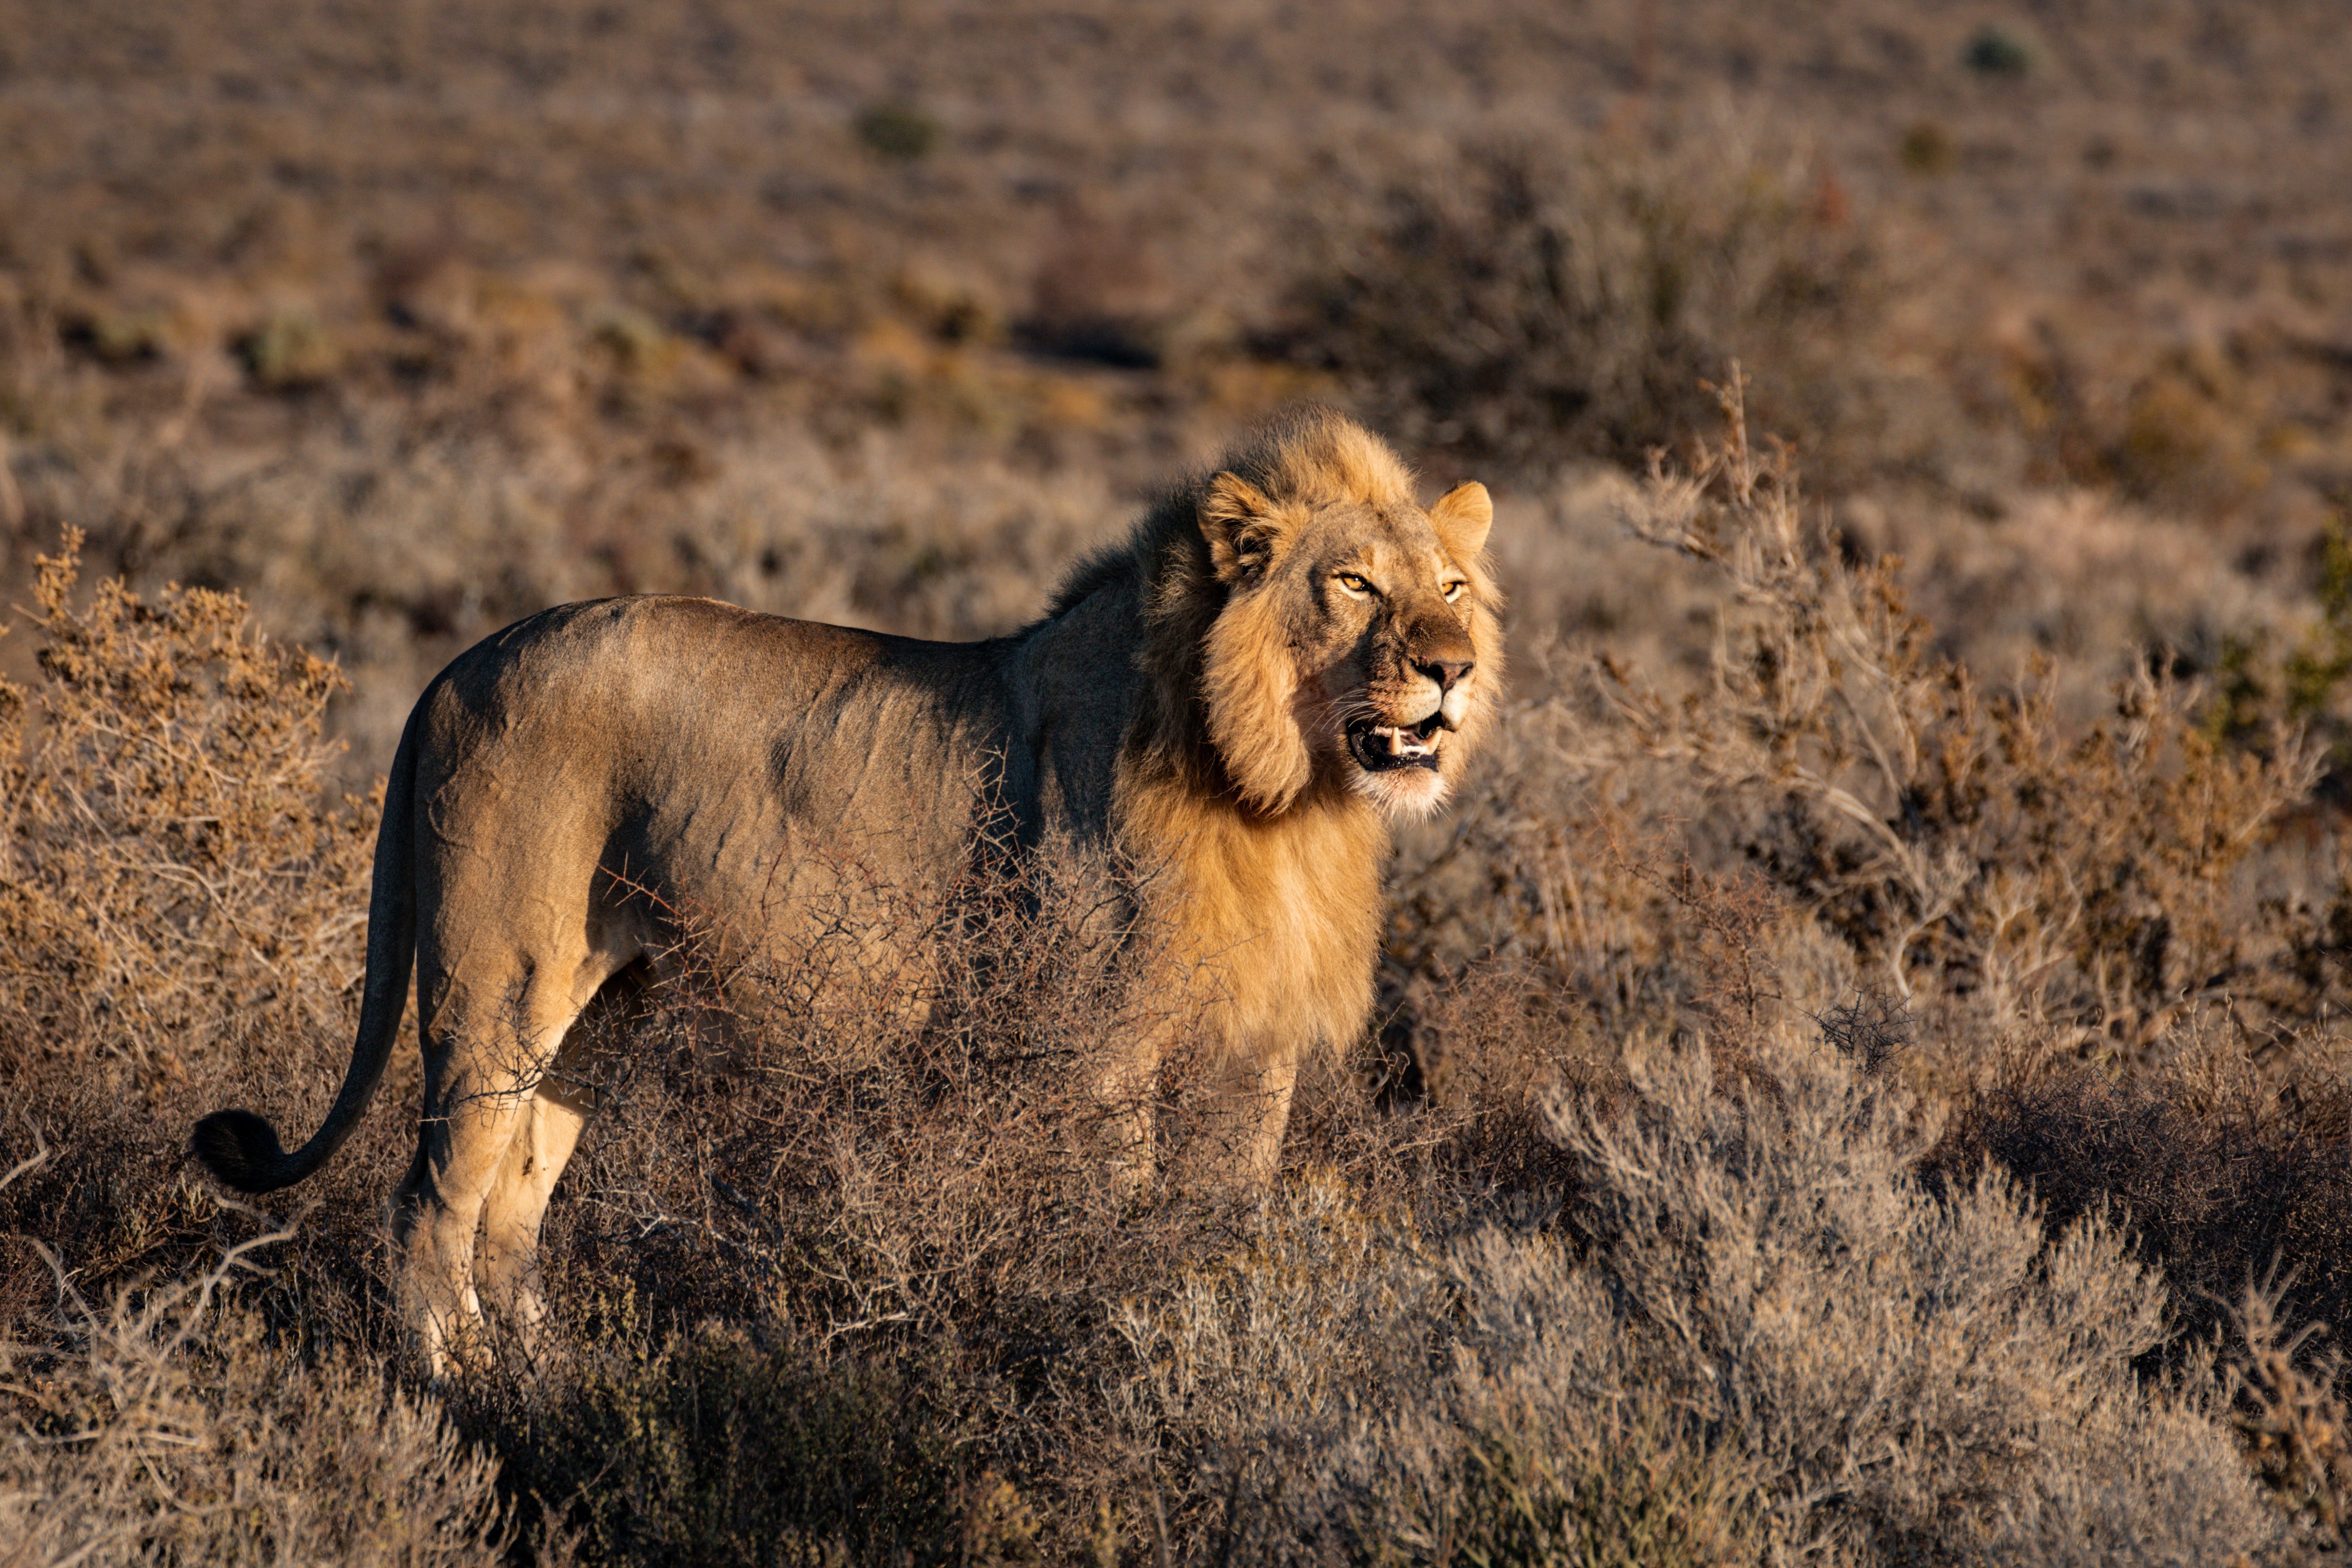 Pictured - An image of a lion out in the wild | Source: Pexels 